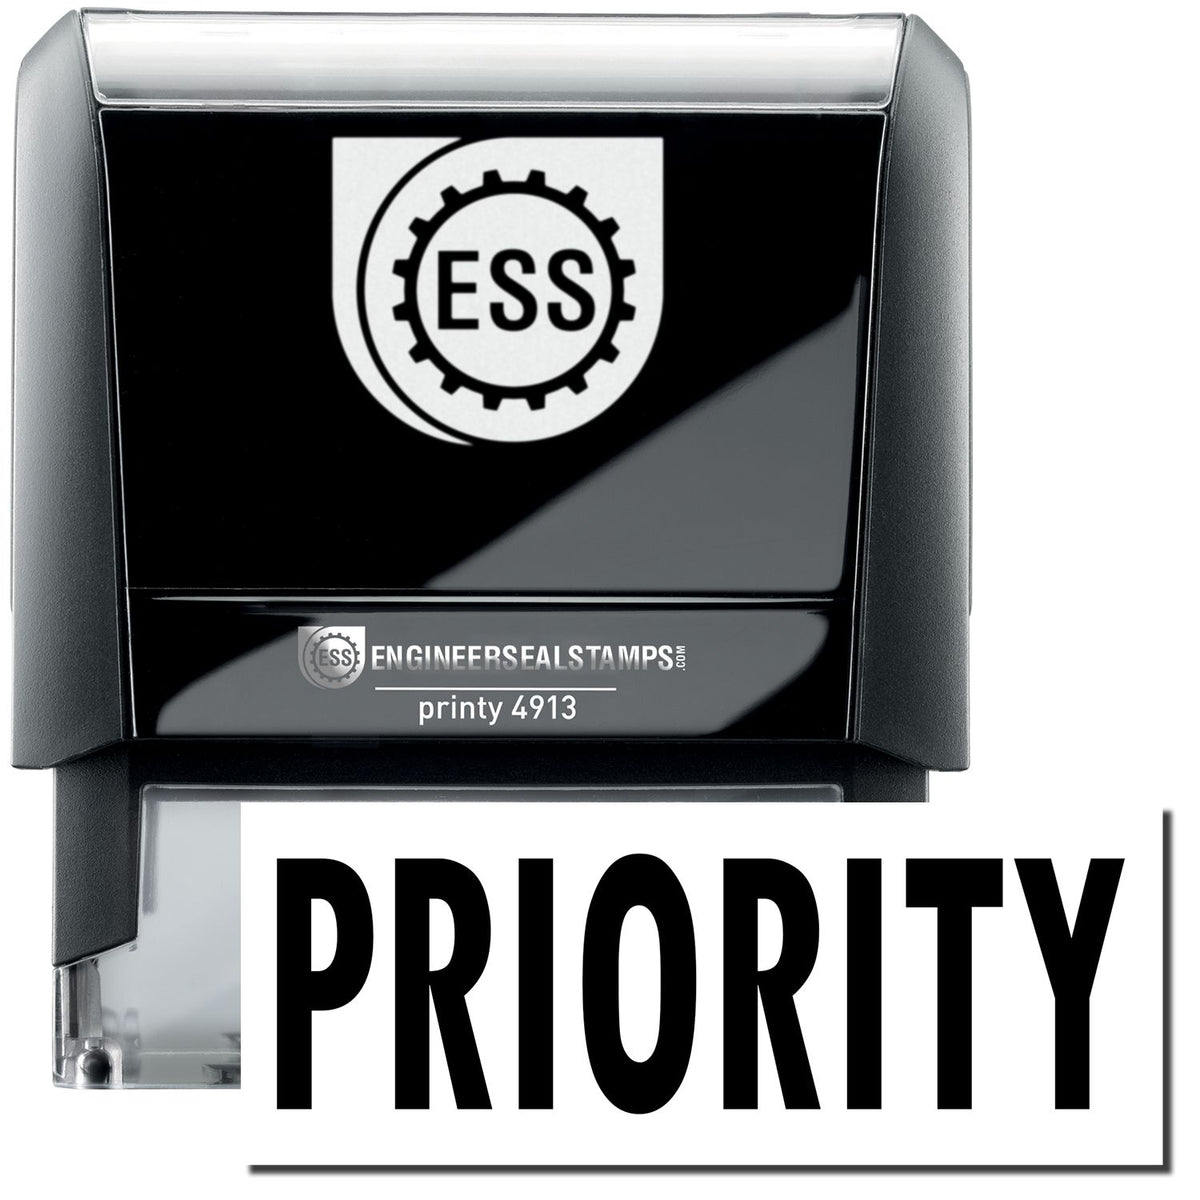 A self-inking stamp with a stamped image showing how the text &quot;PRIORITY&quot; in a large bold font is displayed by it.